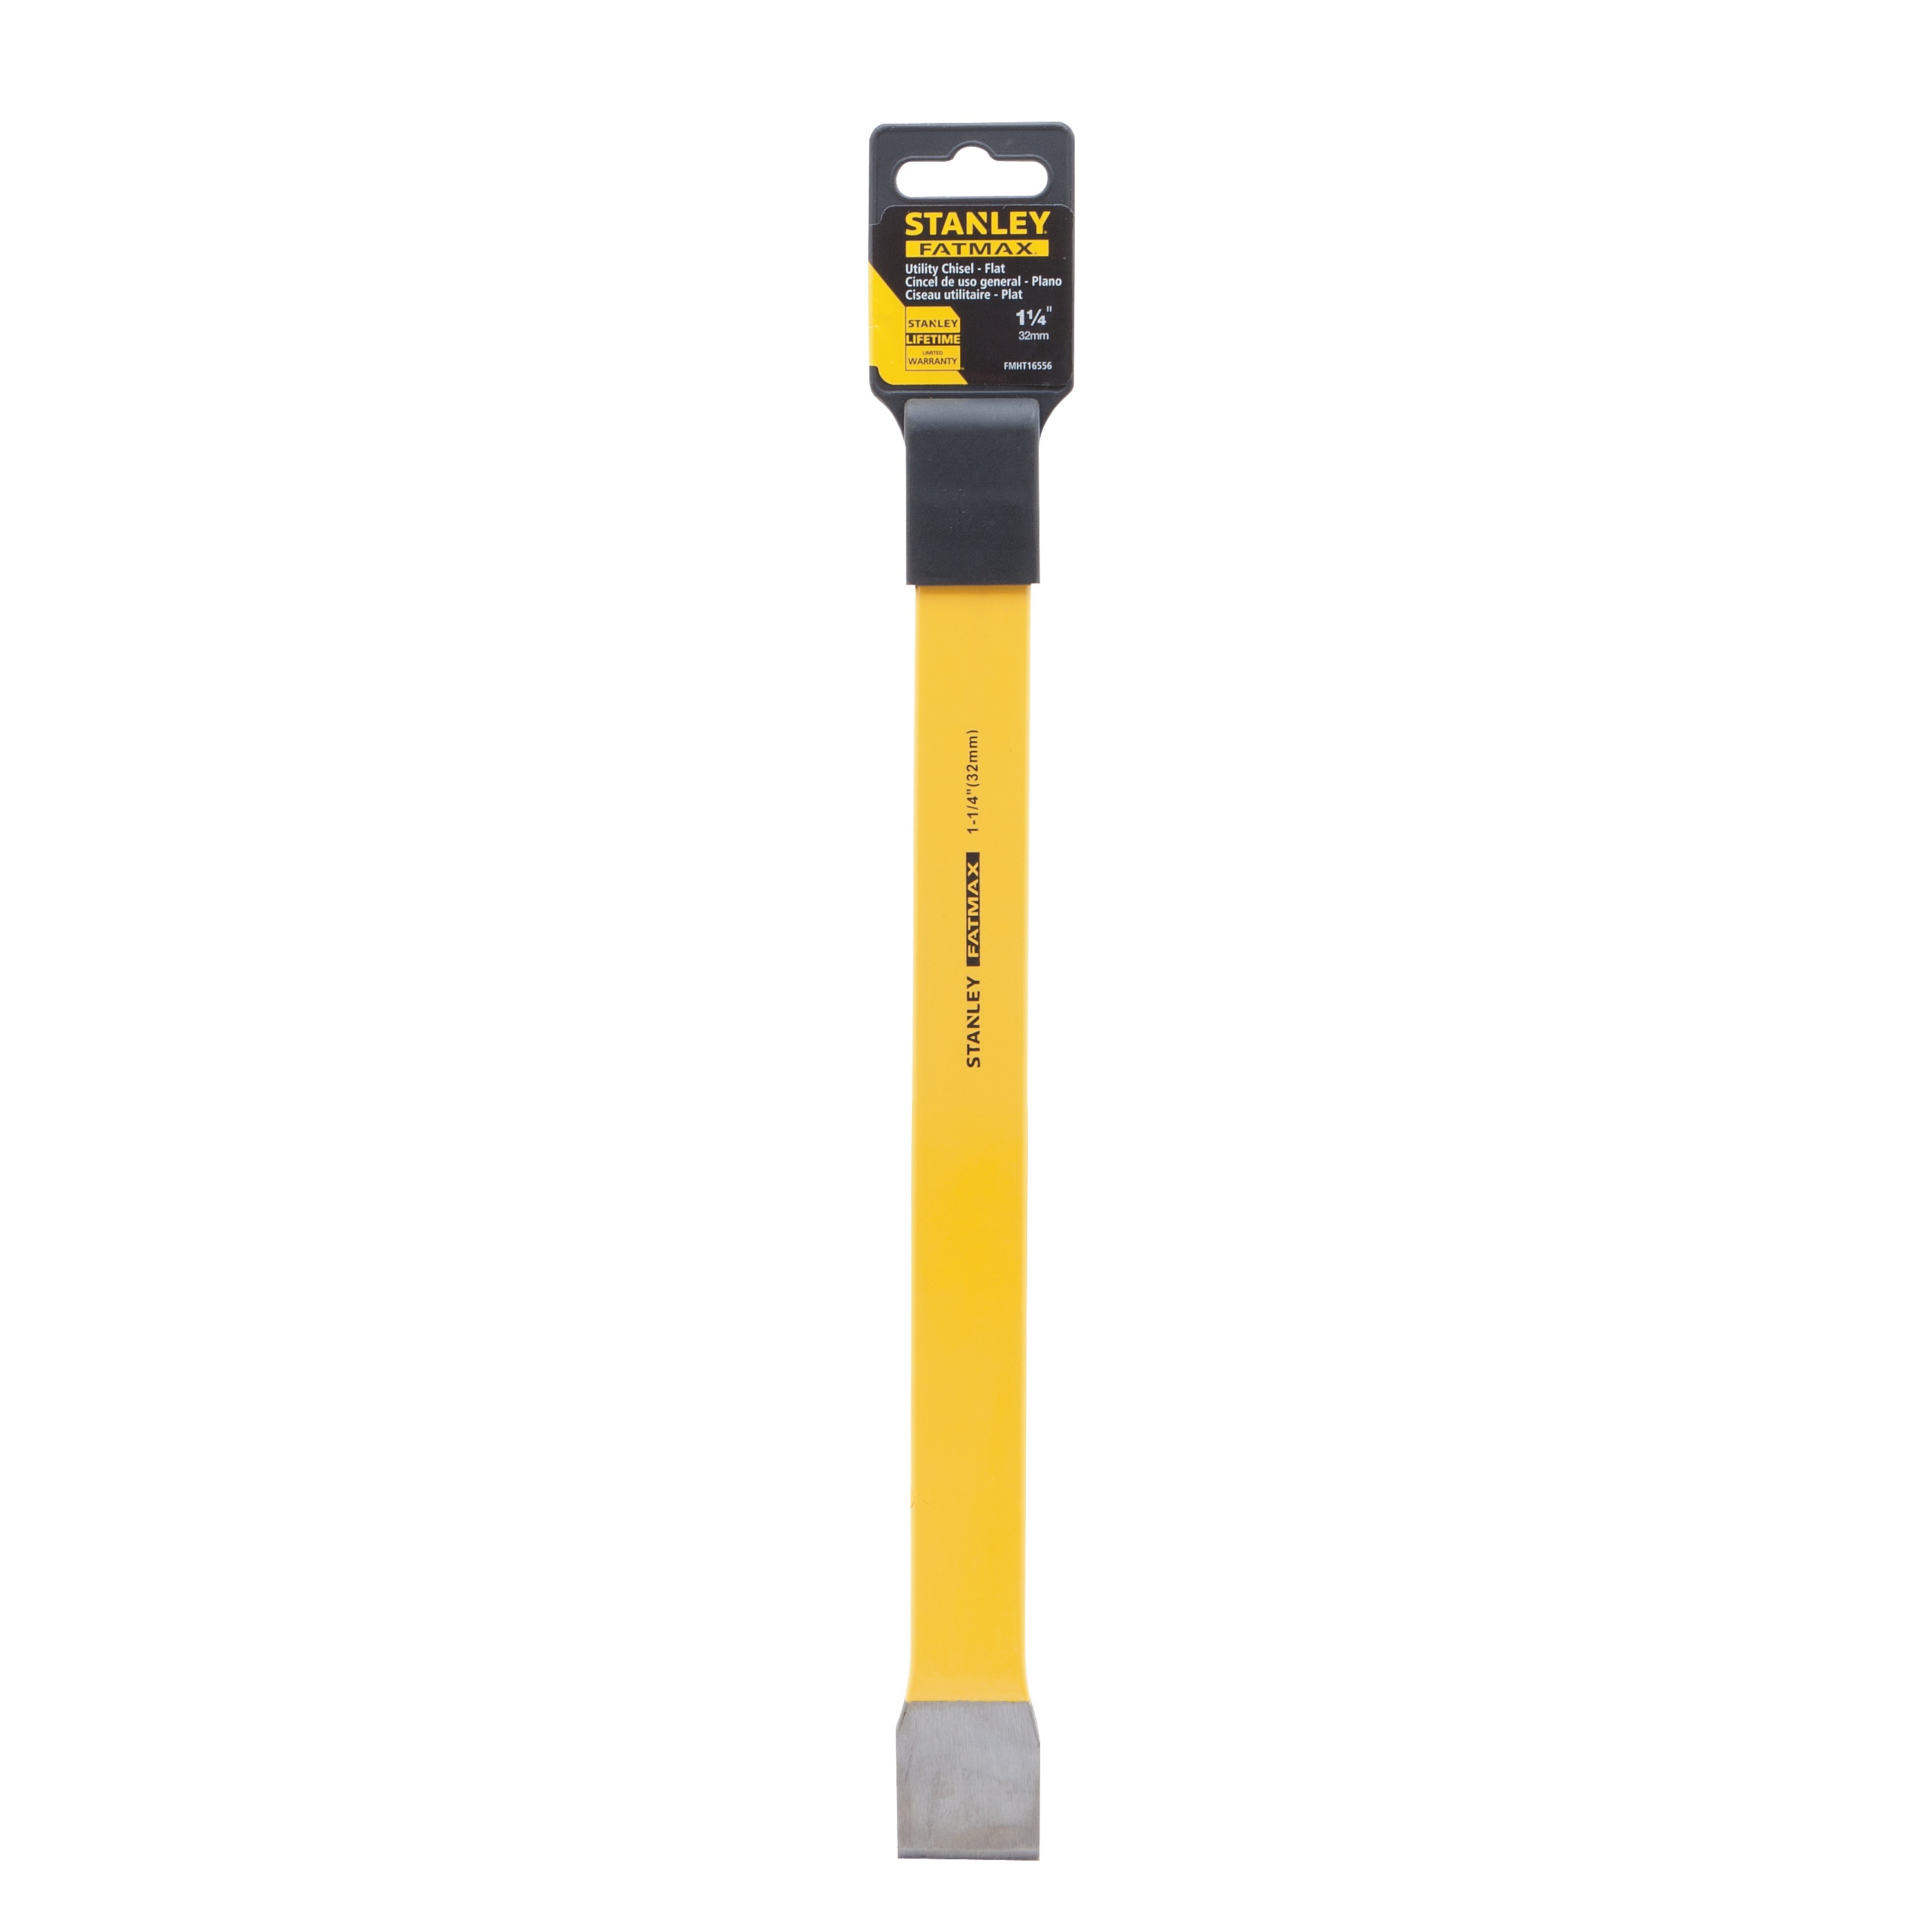 Stanley Tools - 114 in FATMAX Flat Utility Chisel - FMHT16556